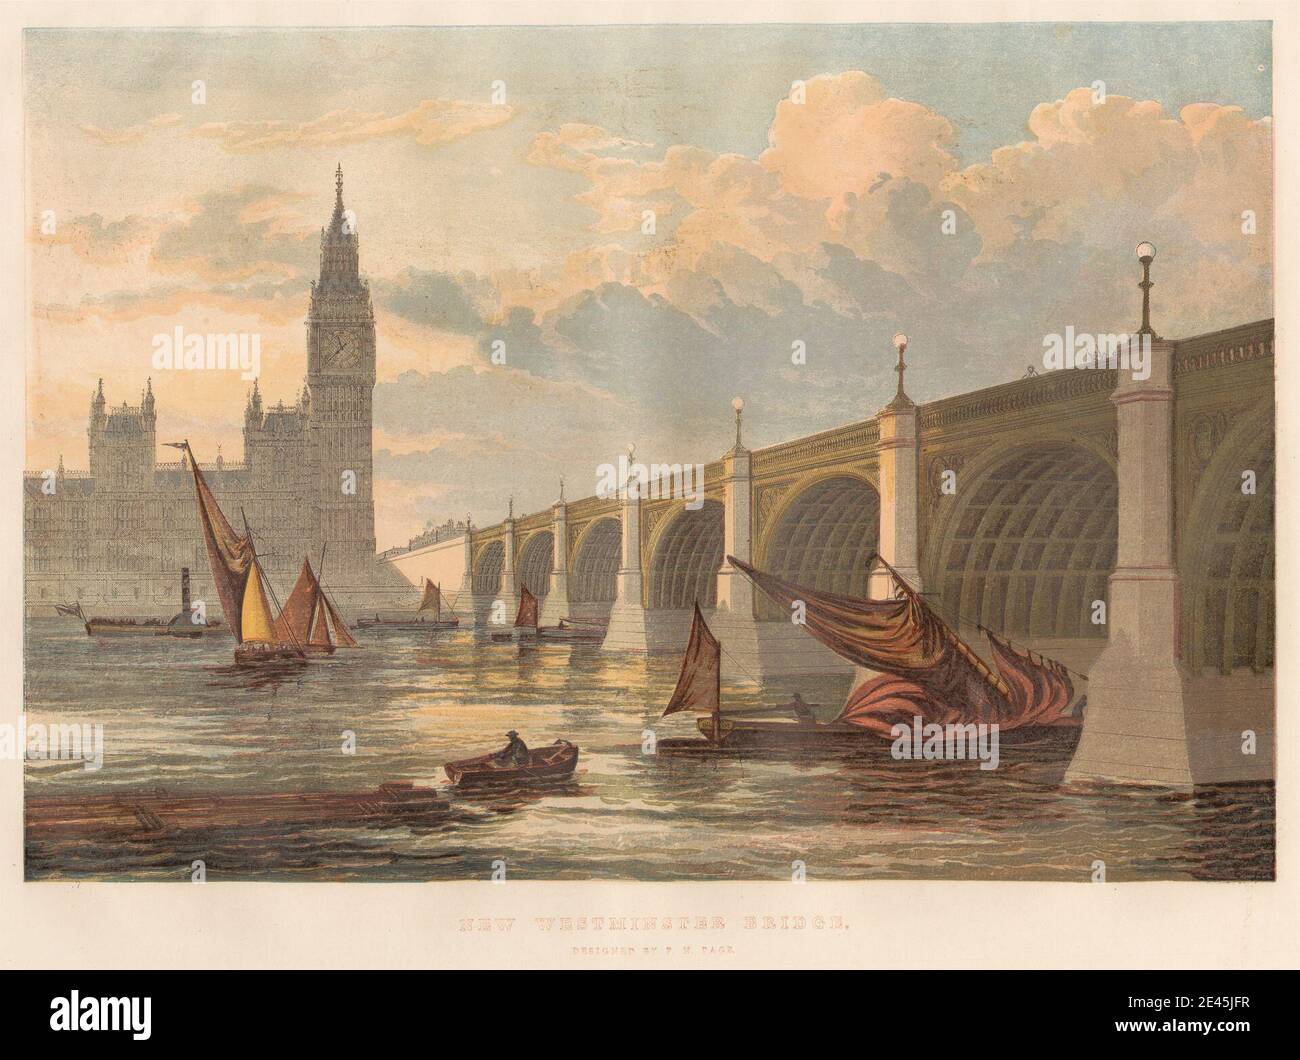 Print made by Leighton Brothers, active 1858â€“1885, New Westminster Bridge, Designed by P. N. Page, 1858. Chromoxylograph on medium, slightly textured, cream wove paper. Stock Photo